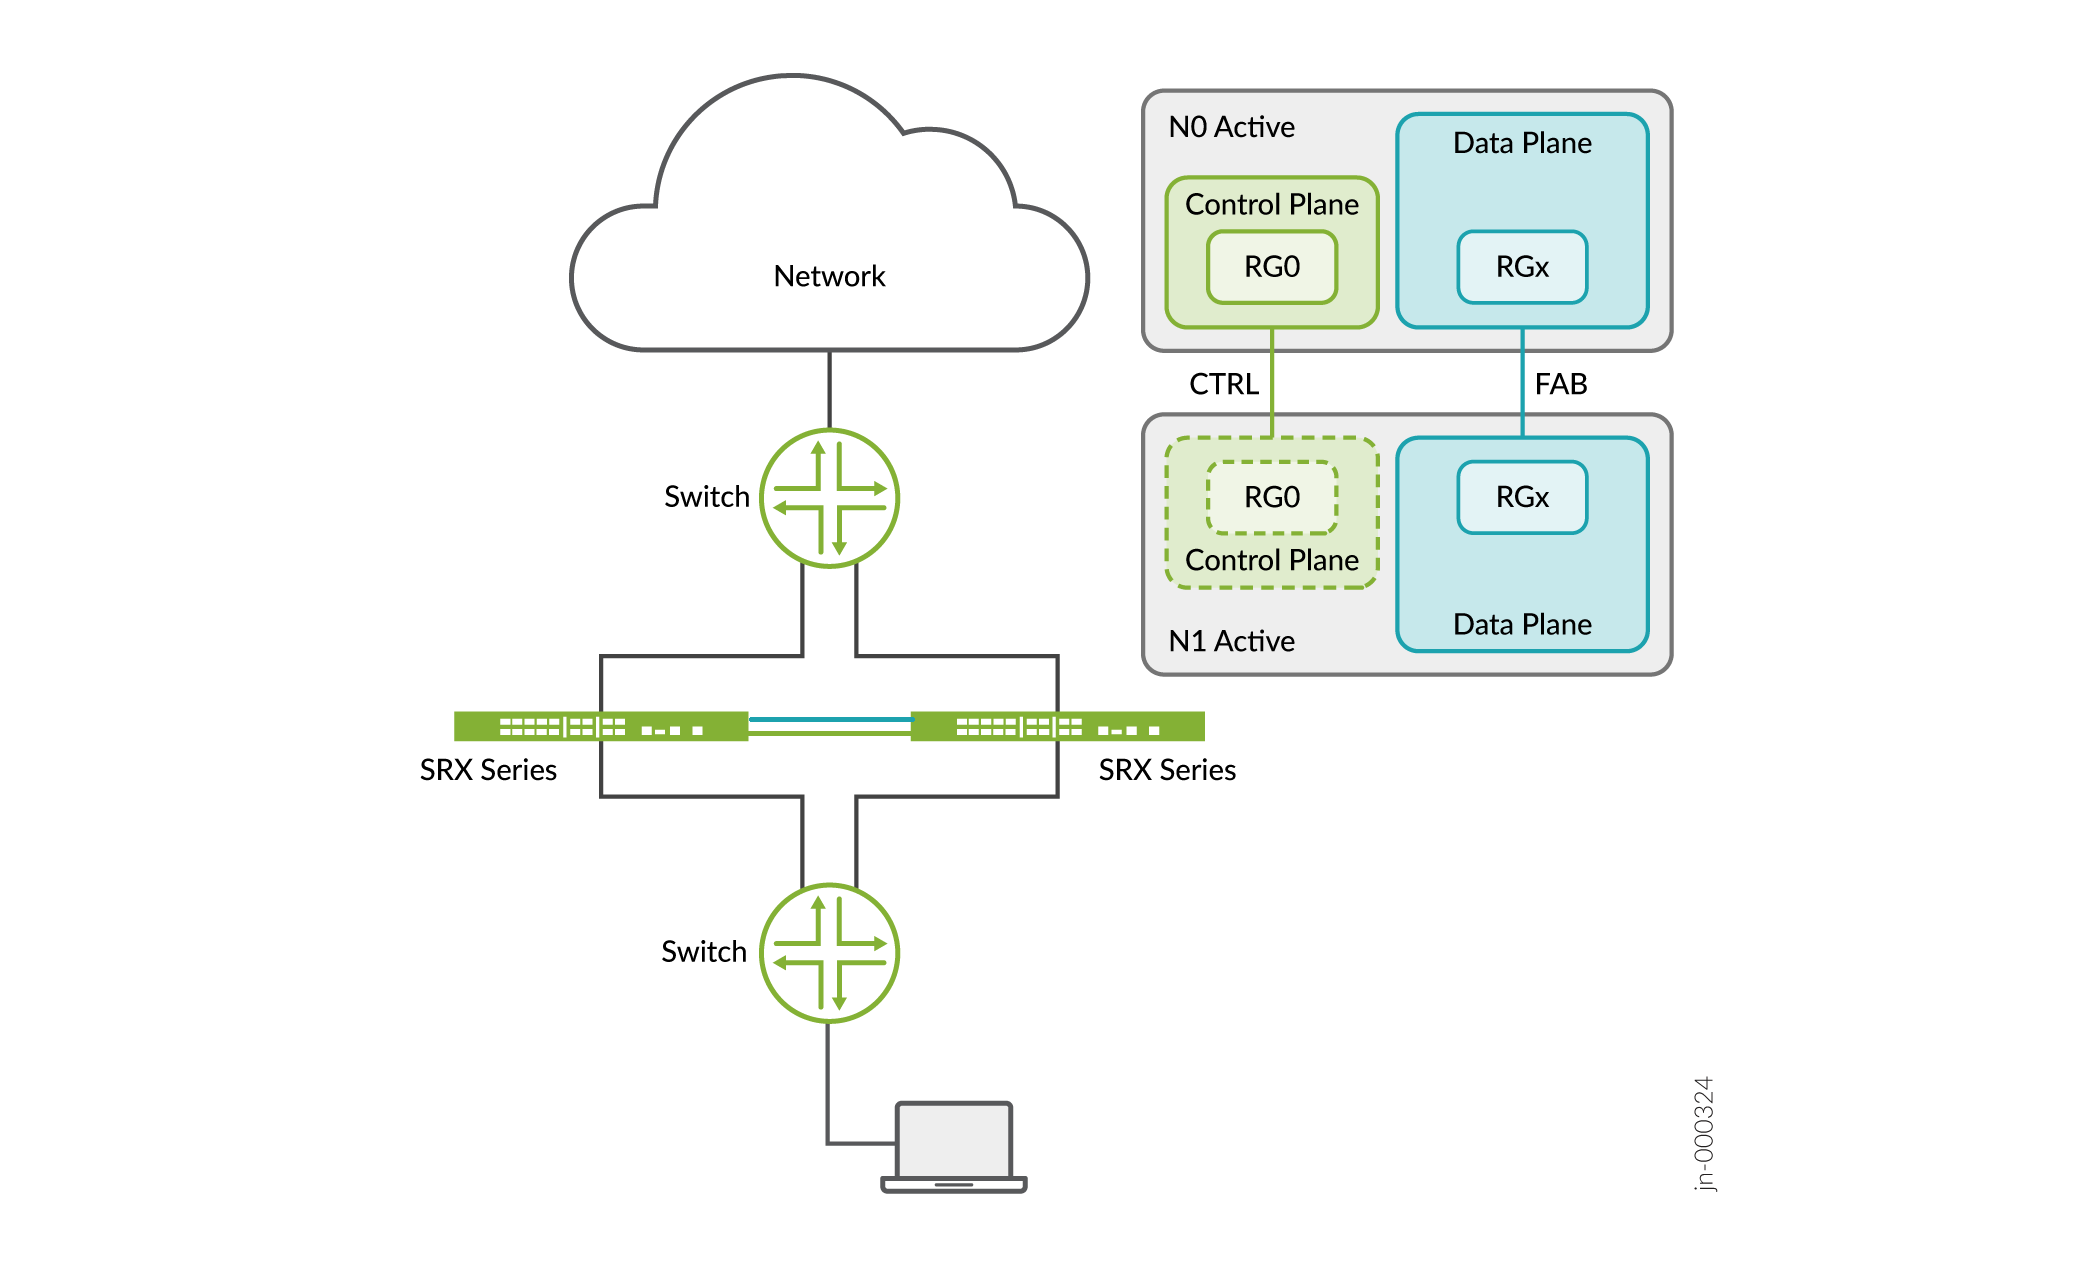 Chassis Cluster Topology in a Layer 2 Network